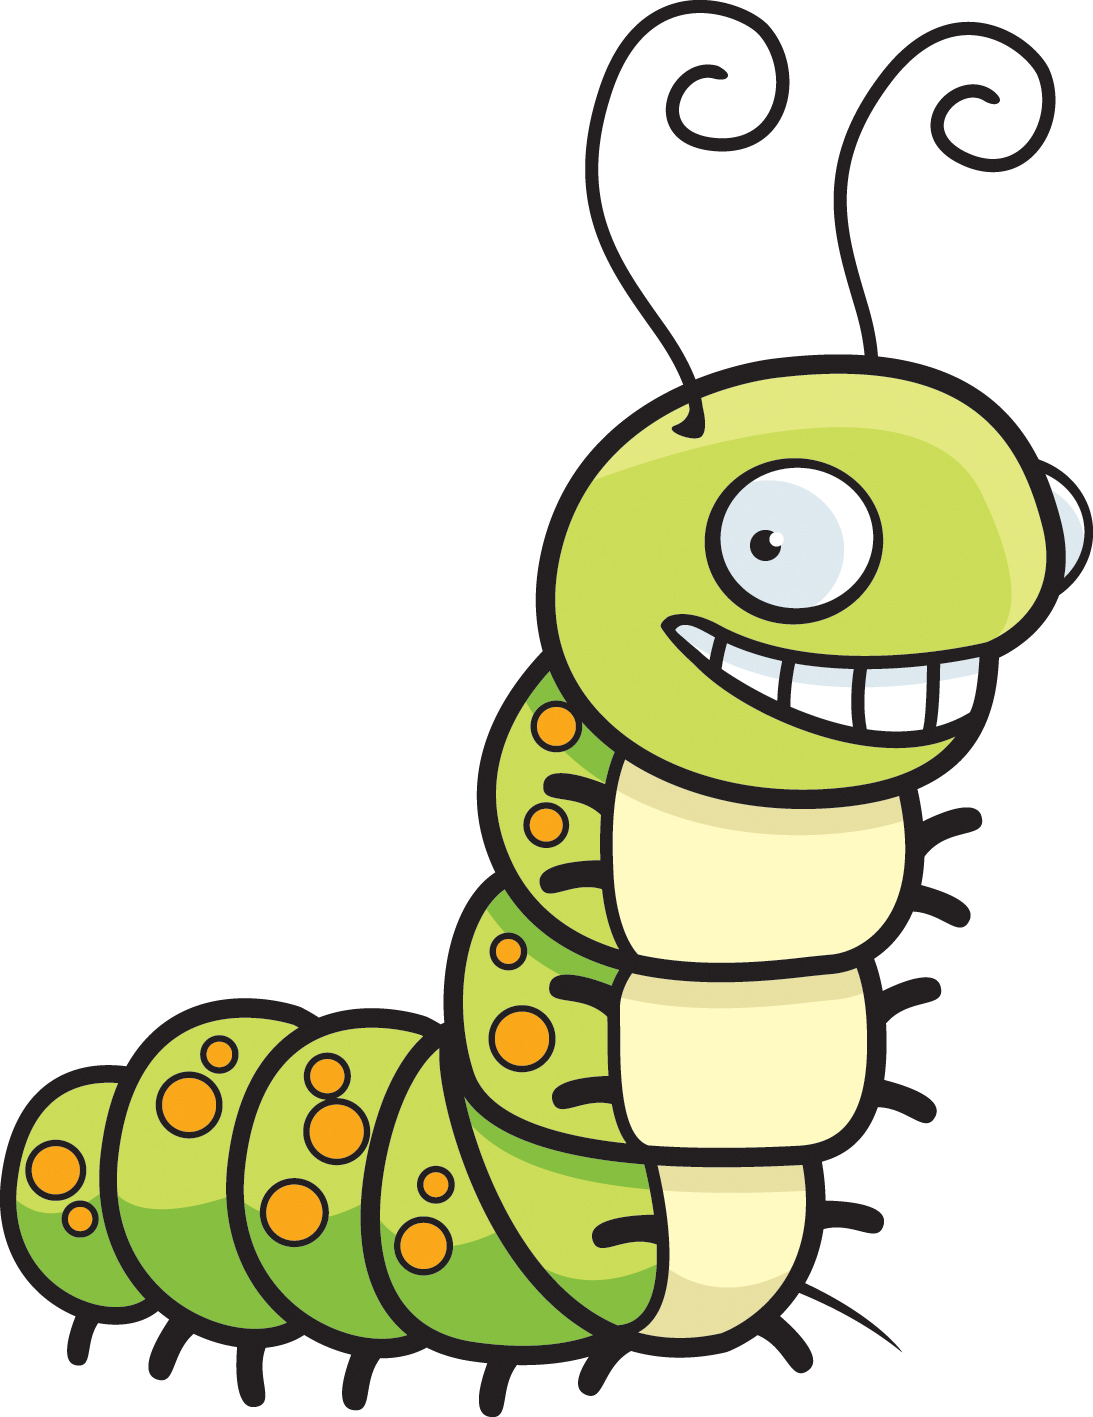 Caterpillar Black And White Clipart